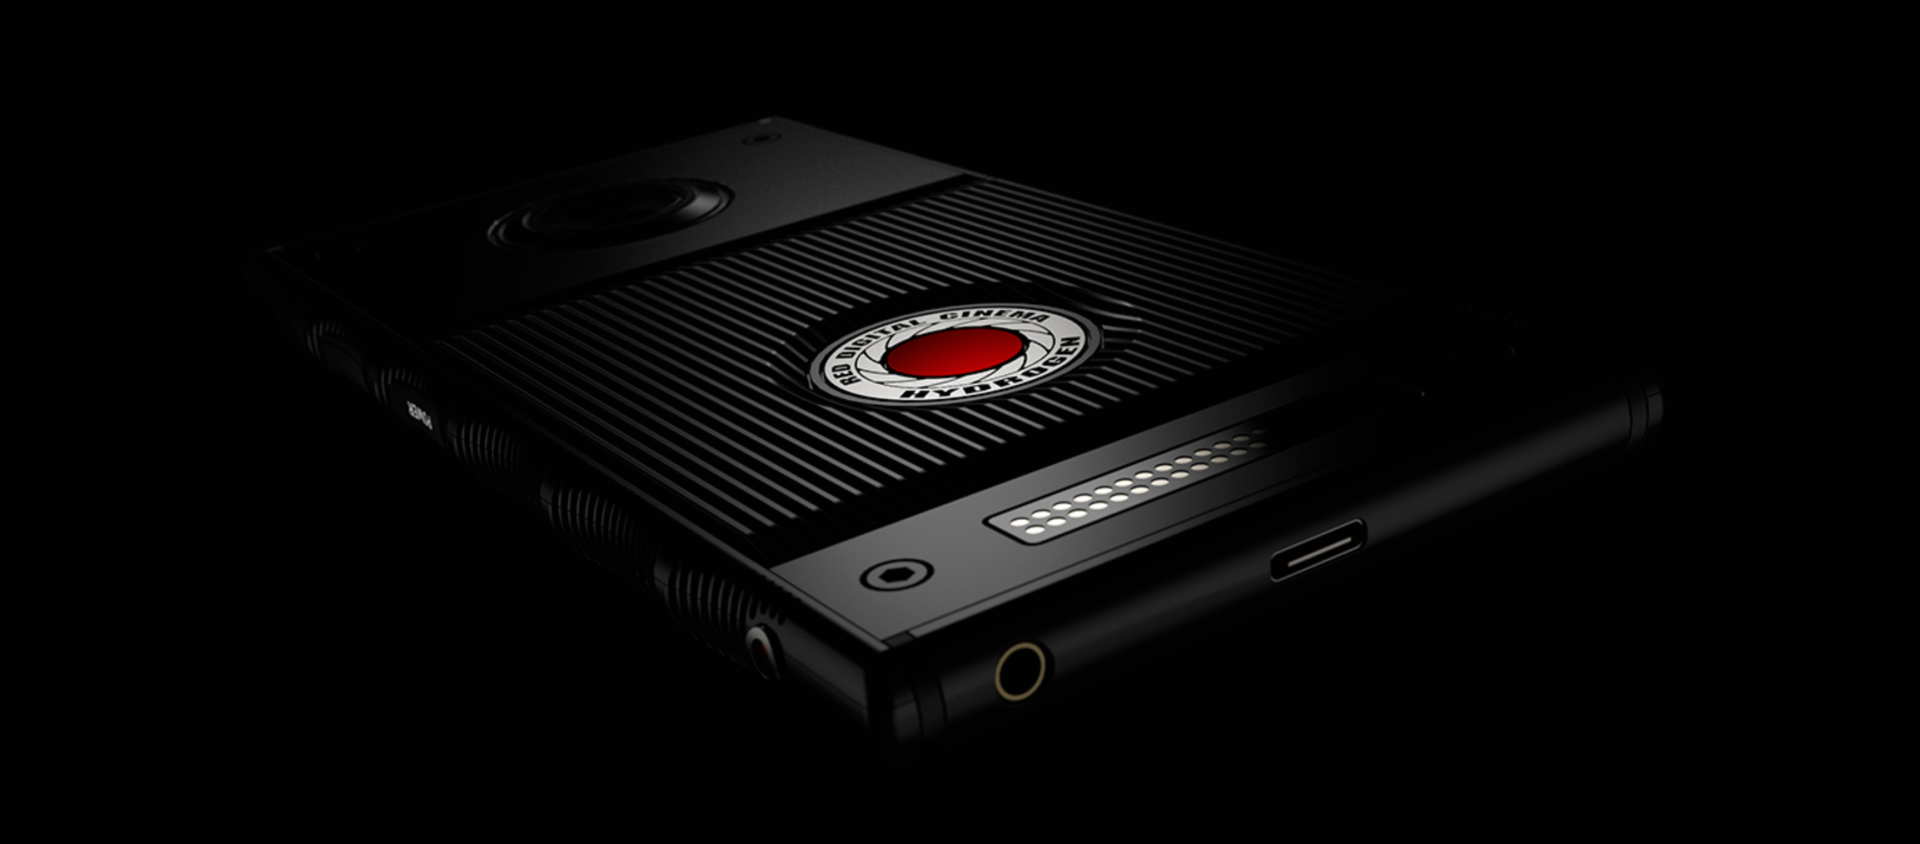 RED announces it’s First Smartphone with Holographic Display and Support for Camera Modules